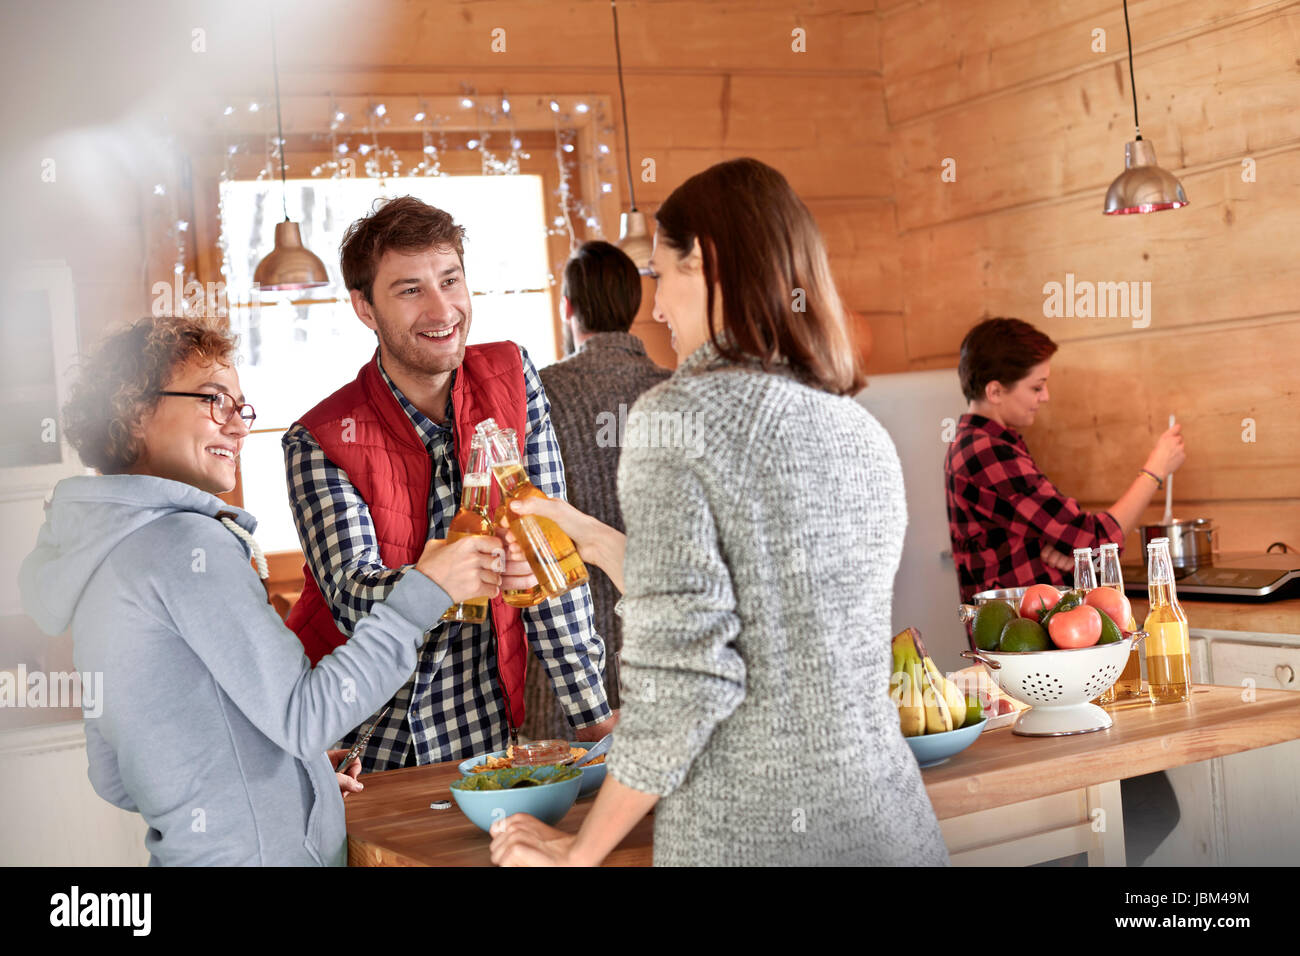 Friends toasting beer bottles in cabin kitchen Stock Photo